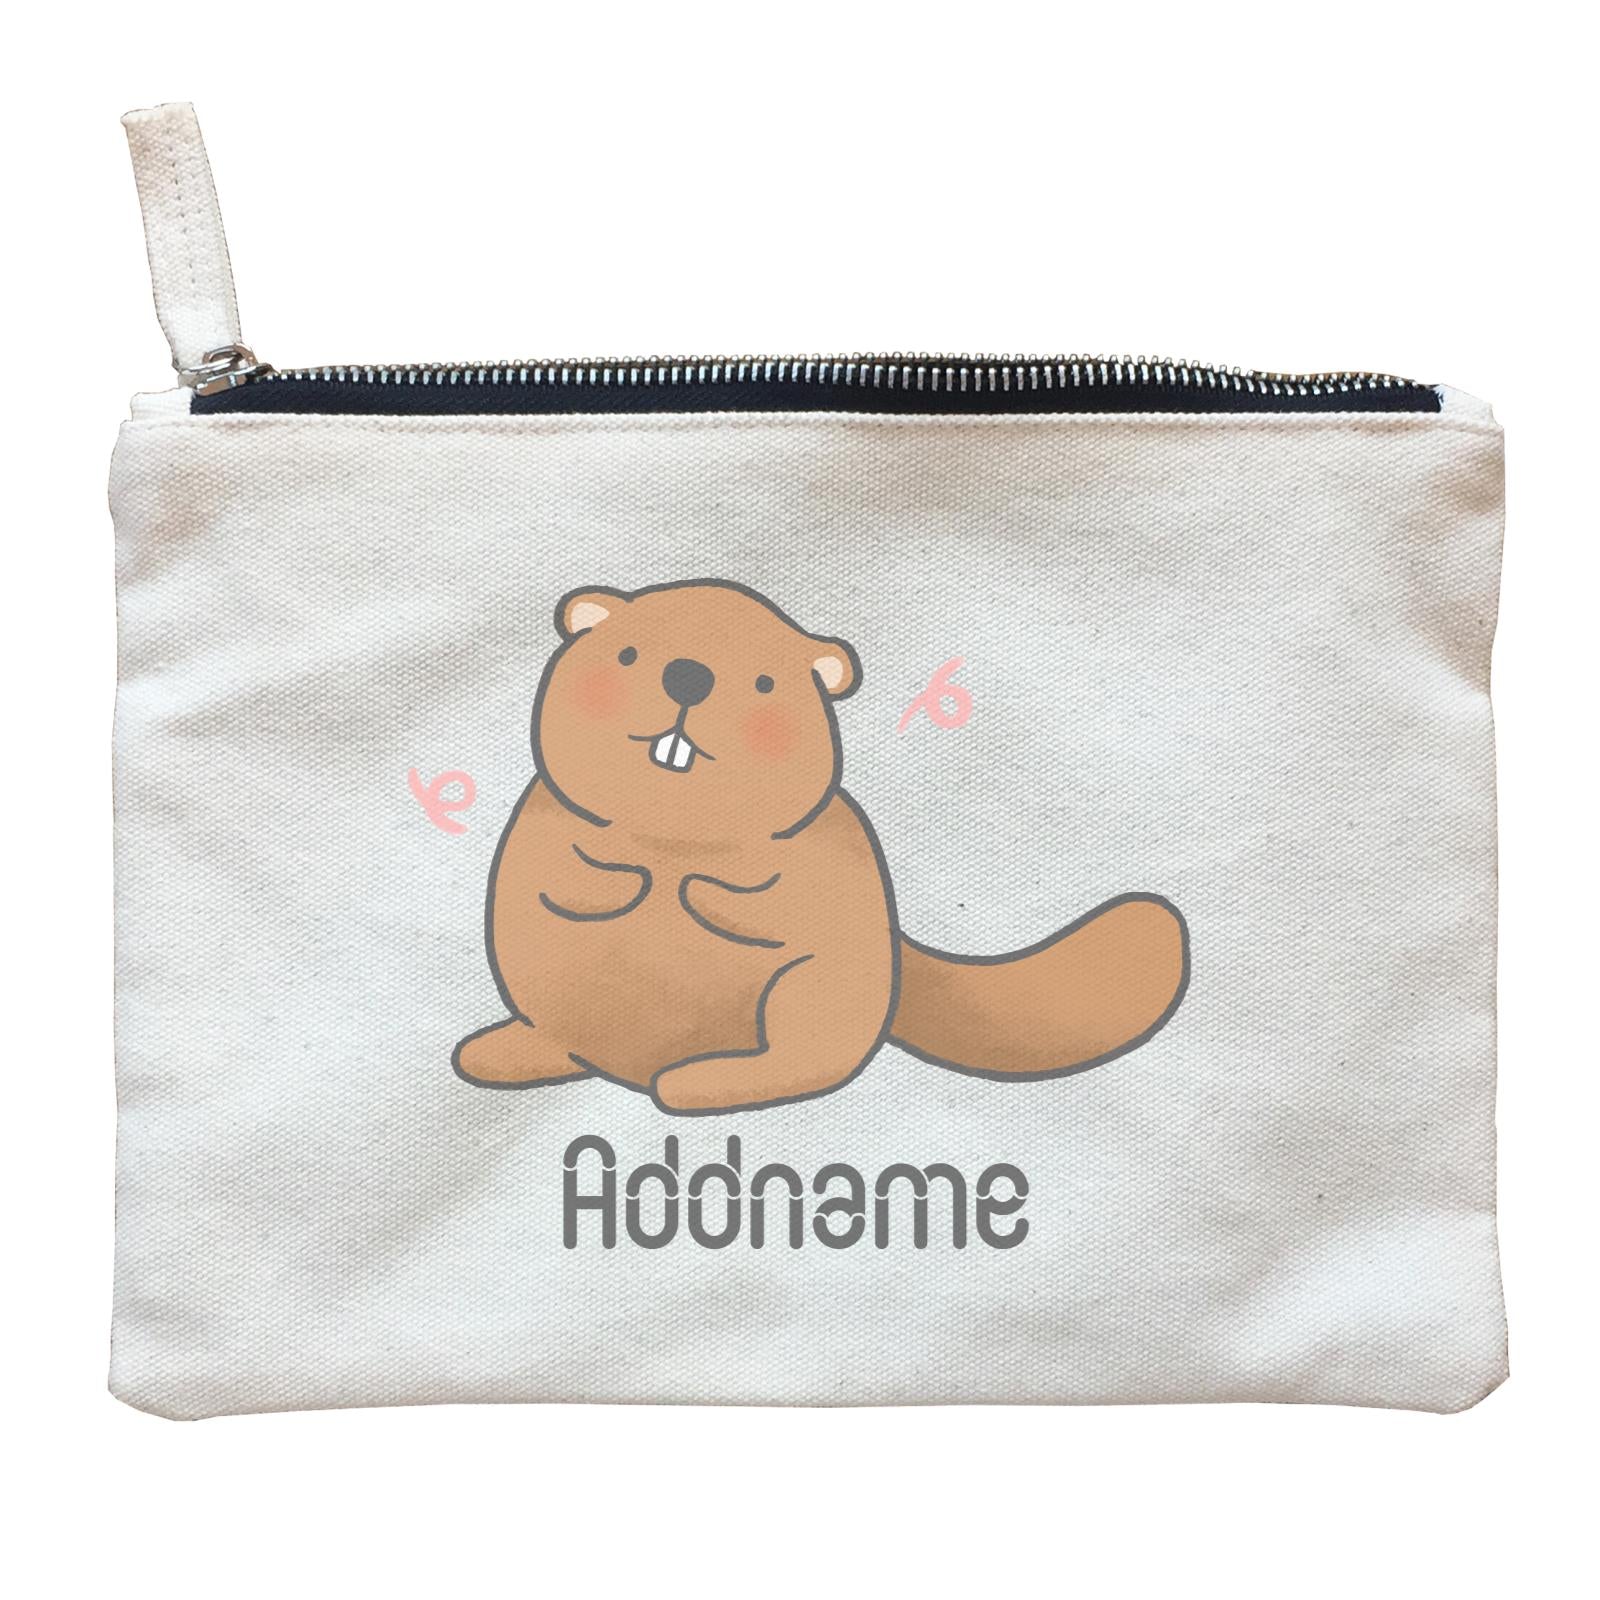 Cute Hand Drawn Style Beaver Addname Zipper Pouch